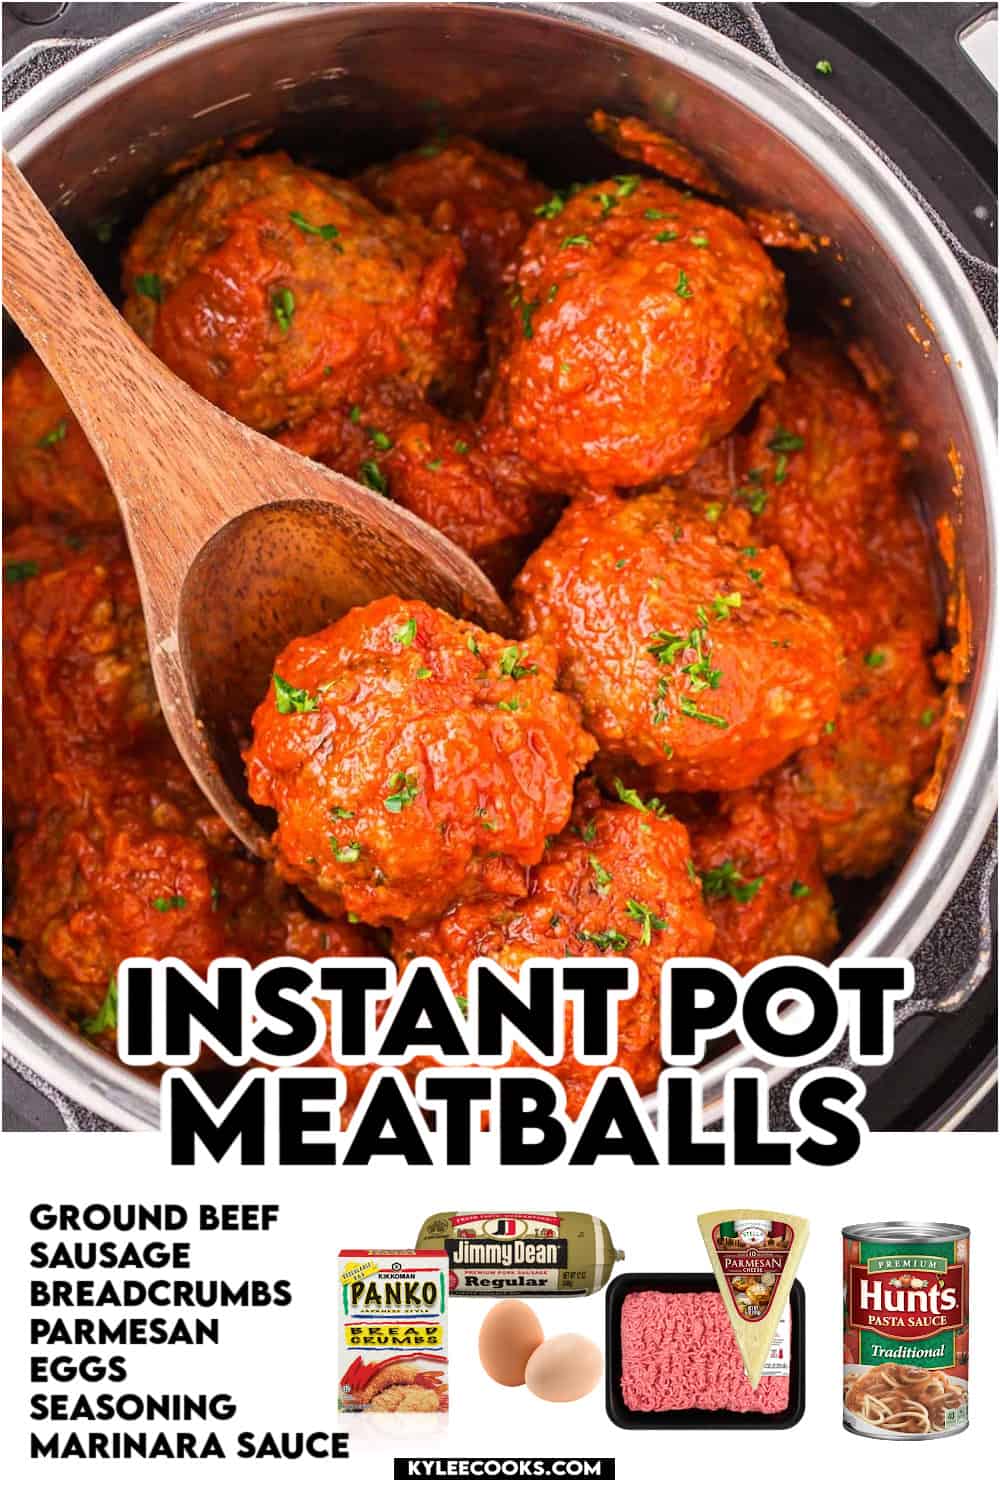 a meatball on a ladle, with recipe name and ingredients overlaid in text and images.